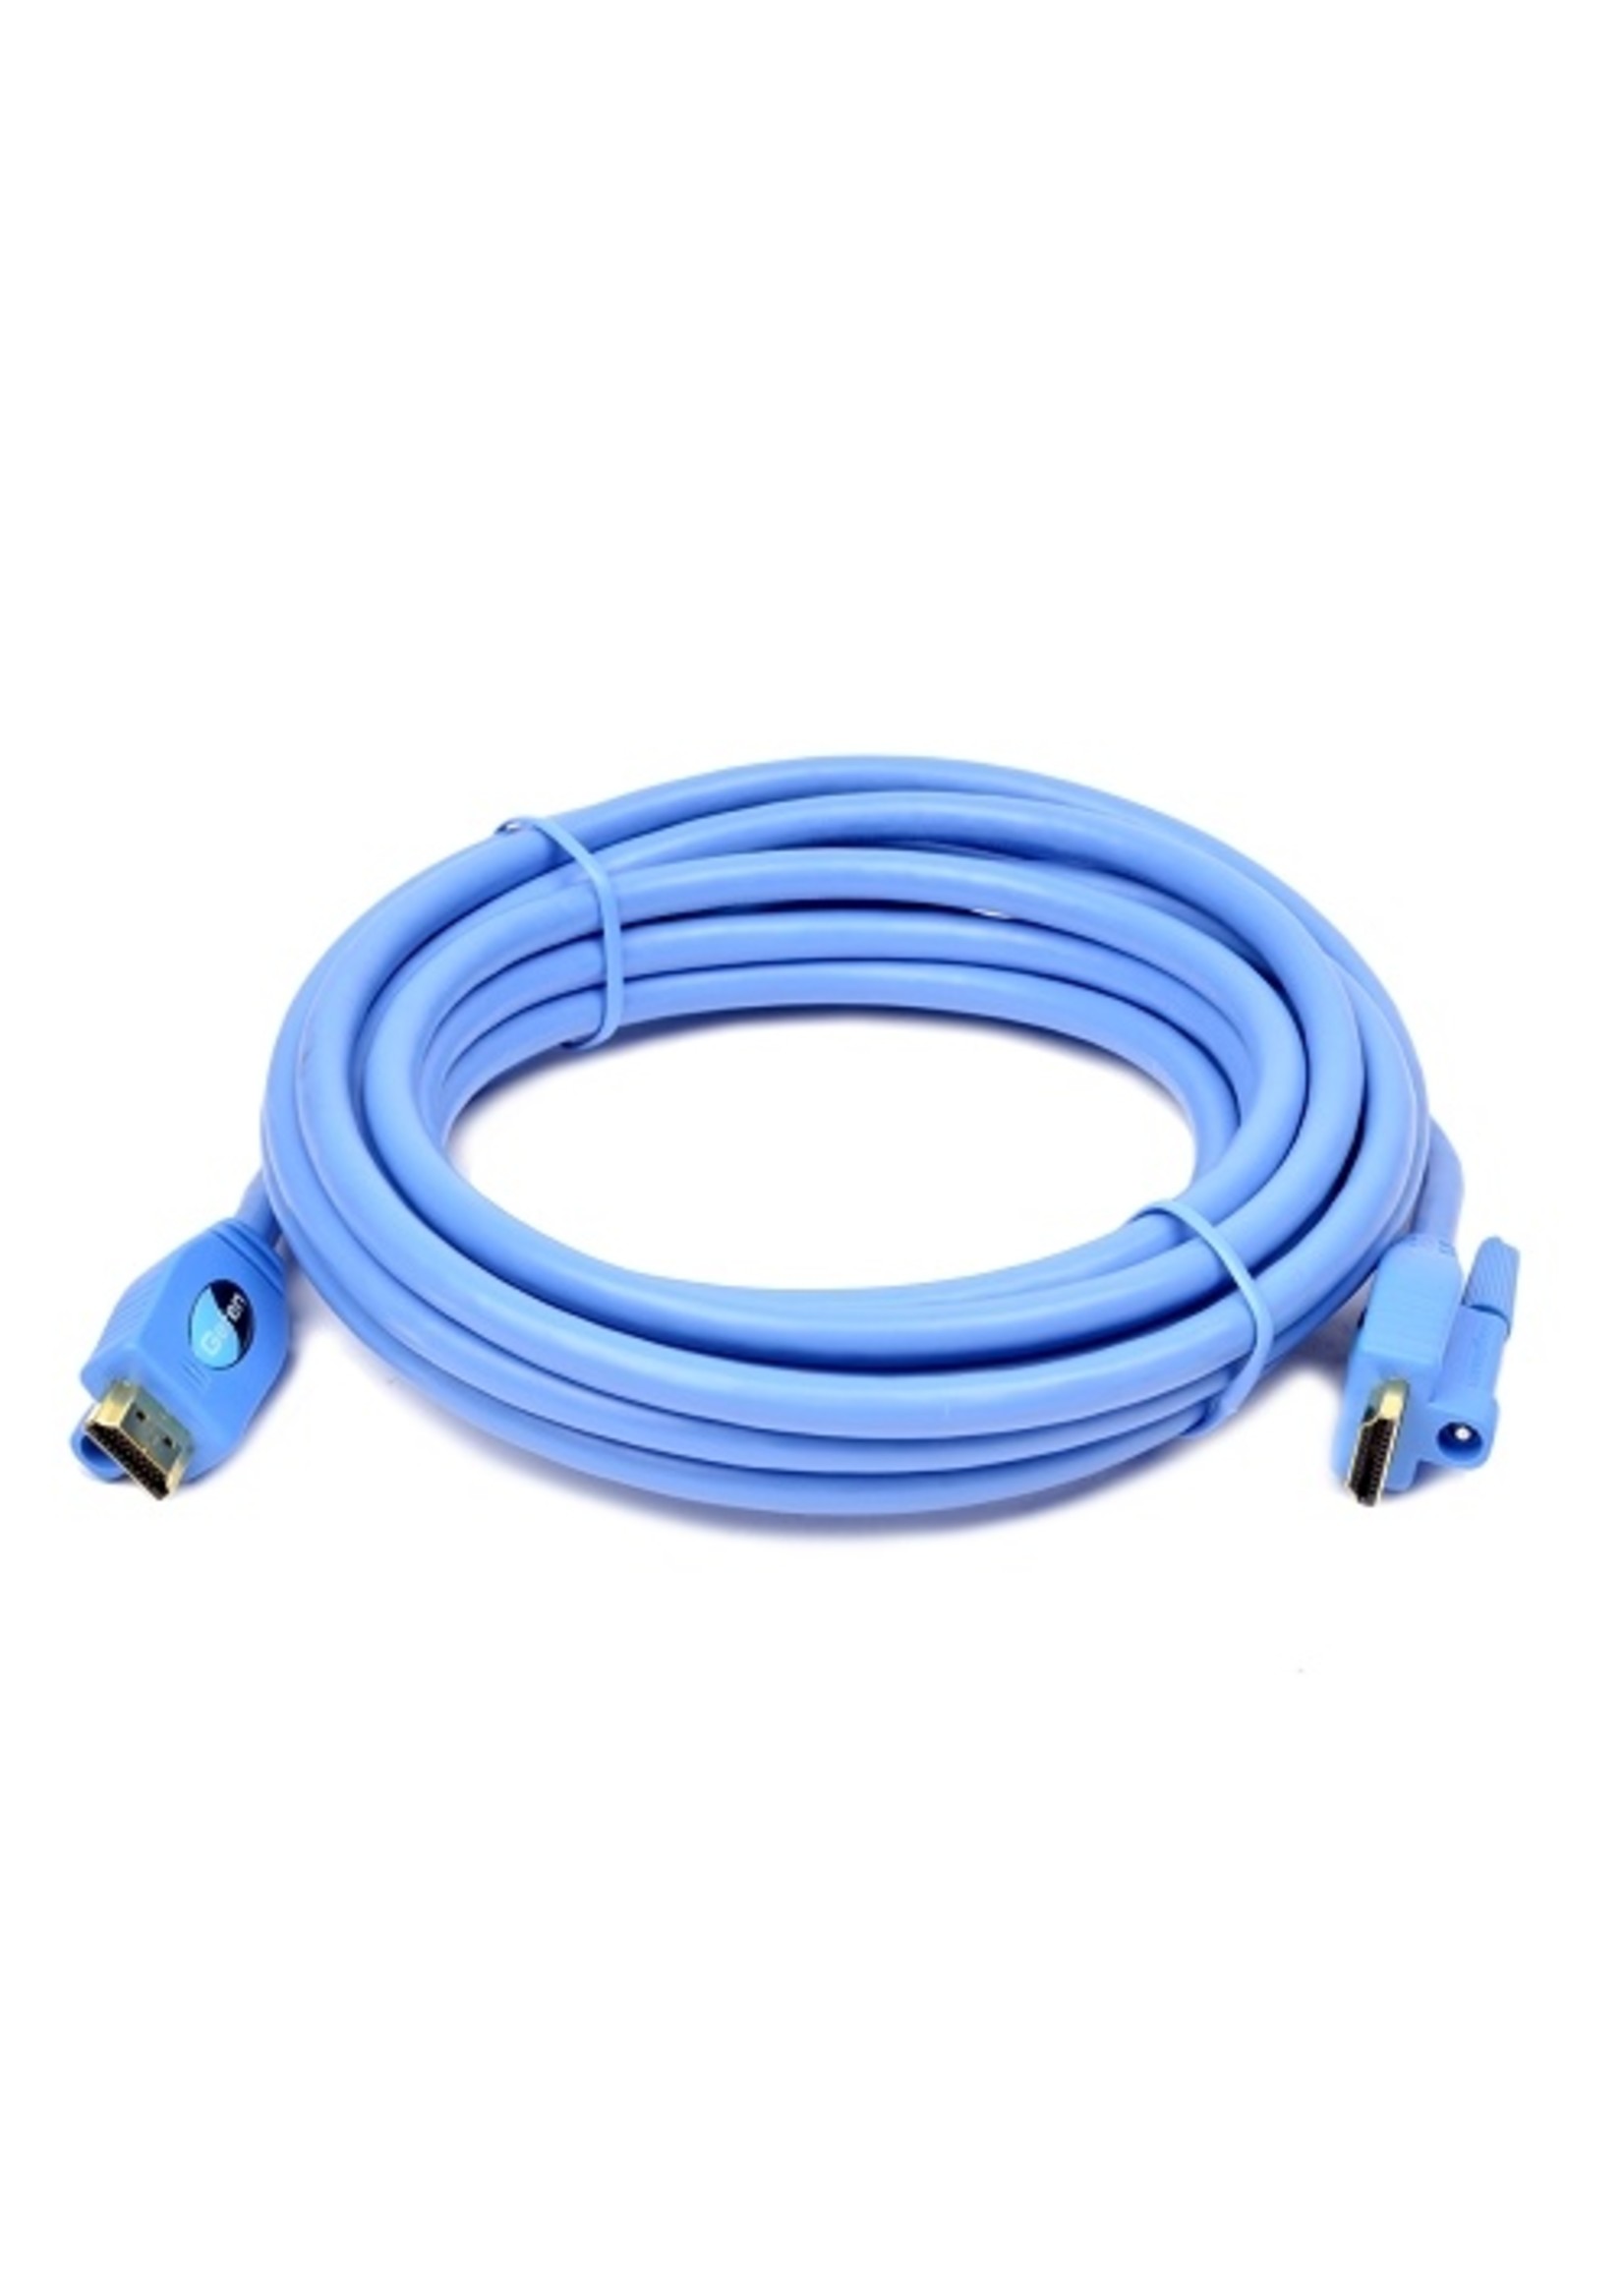 15' M-M V1.3 to  HDMI Cable